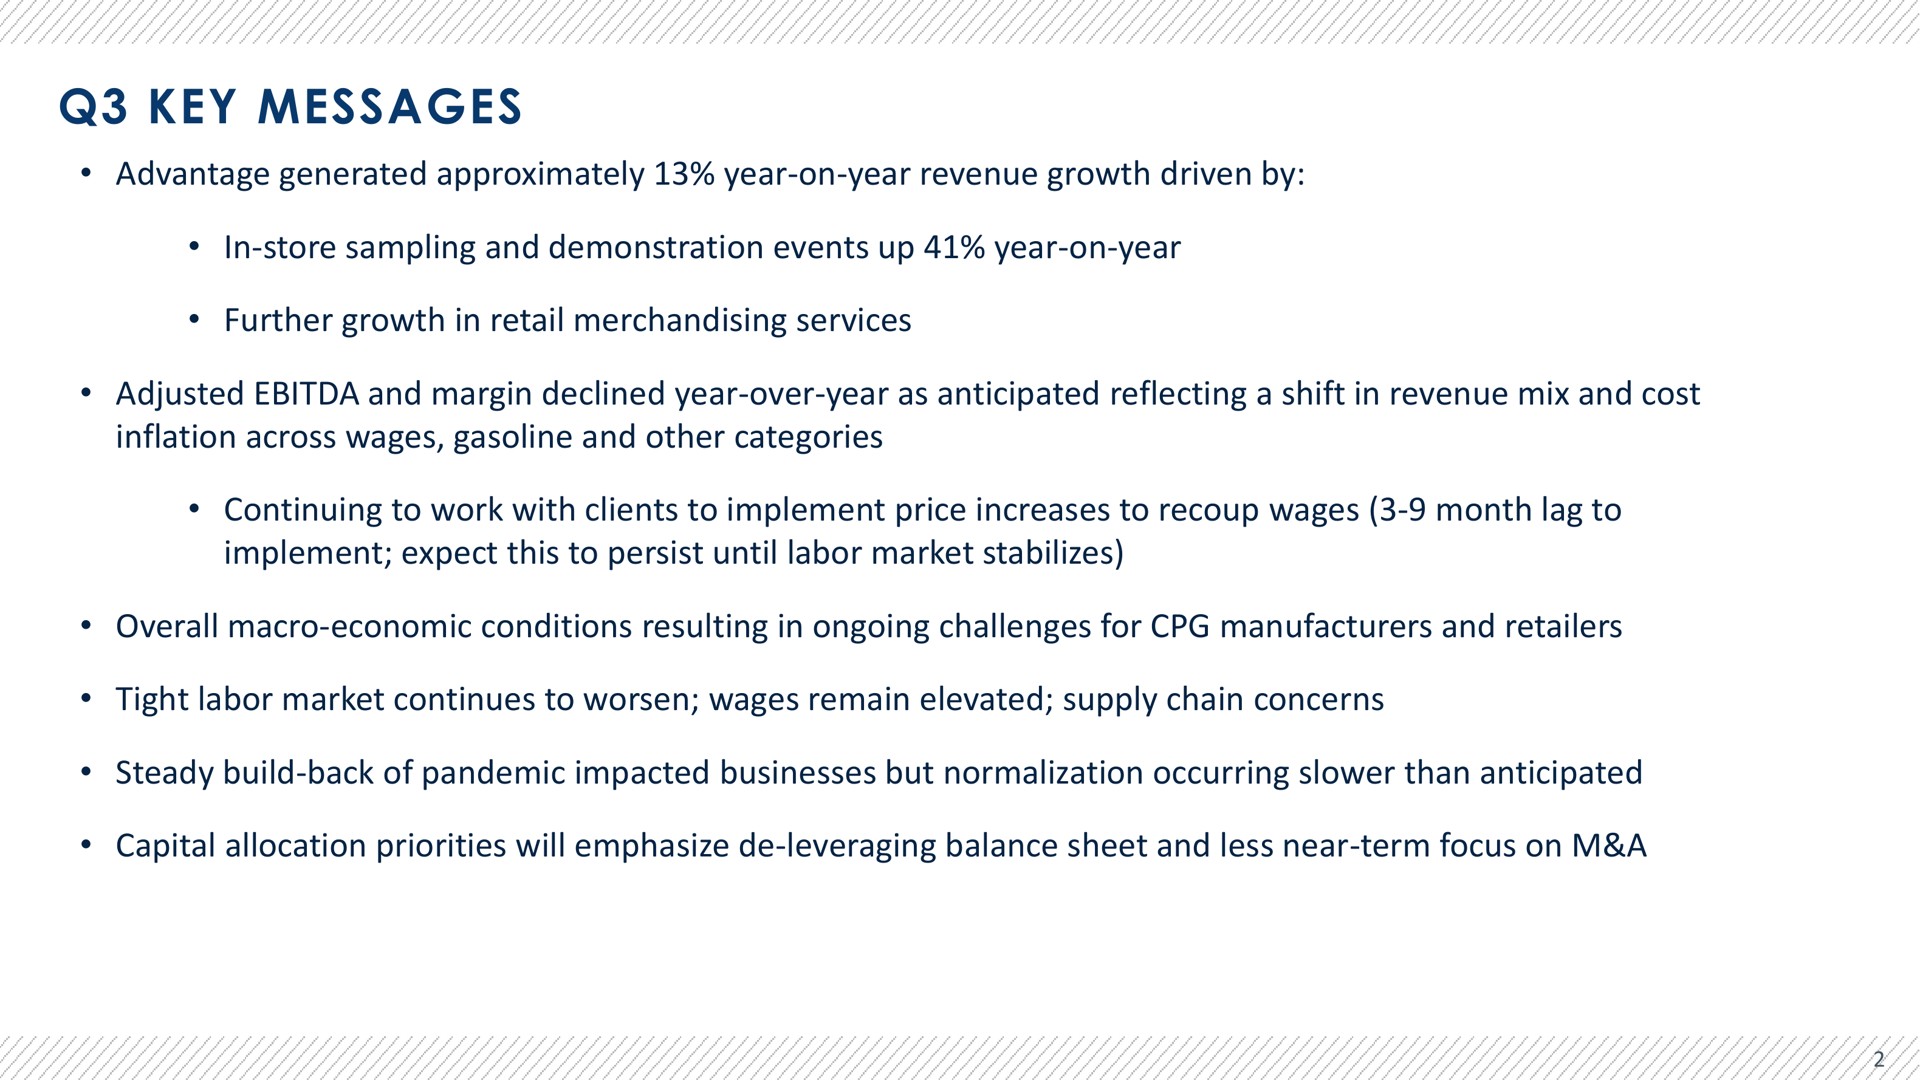 key messages advantage generated approximately year on year revenue growth driven by in store sampling and demonstration events up year on year further growth in retail merchandising services adjusted and margin declined year over year as anticipated reflecting a shift in revenue mix and cost inflation across wages gasoline and other categories continuing to work with clients to implement price increases to recoup wages month lag to implement expect this to persist until labor market stabilizes overall macro economic conditions resulting in ongoing challenges for manufacturers and retailers tight labor market continues to worsen wages remain elevated supply chain concerns steady build back of pandemic impacted businesses but normalization occurring than anticipated capital allocation priorities will emphasize leveraging balance sheet and less near term focus on a | Advantage Solutions